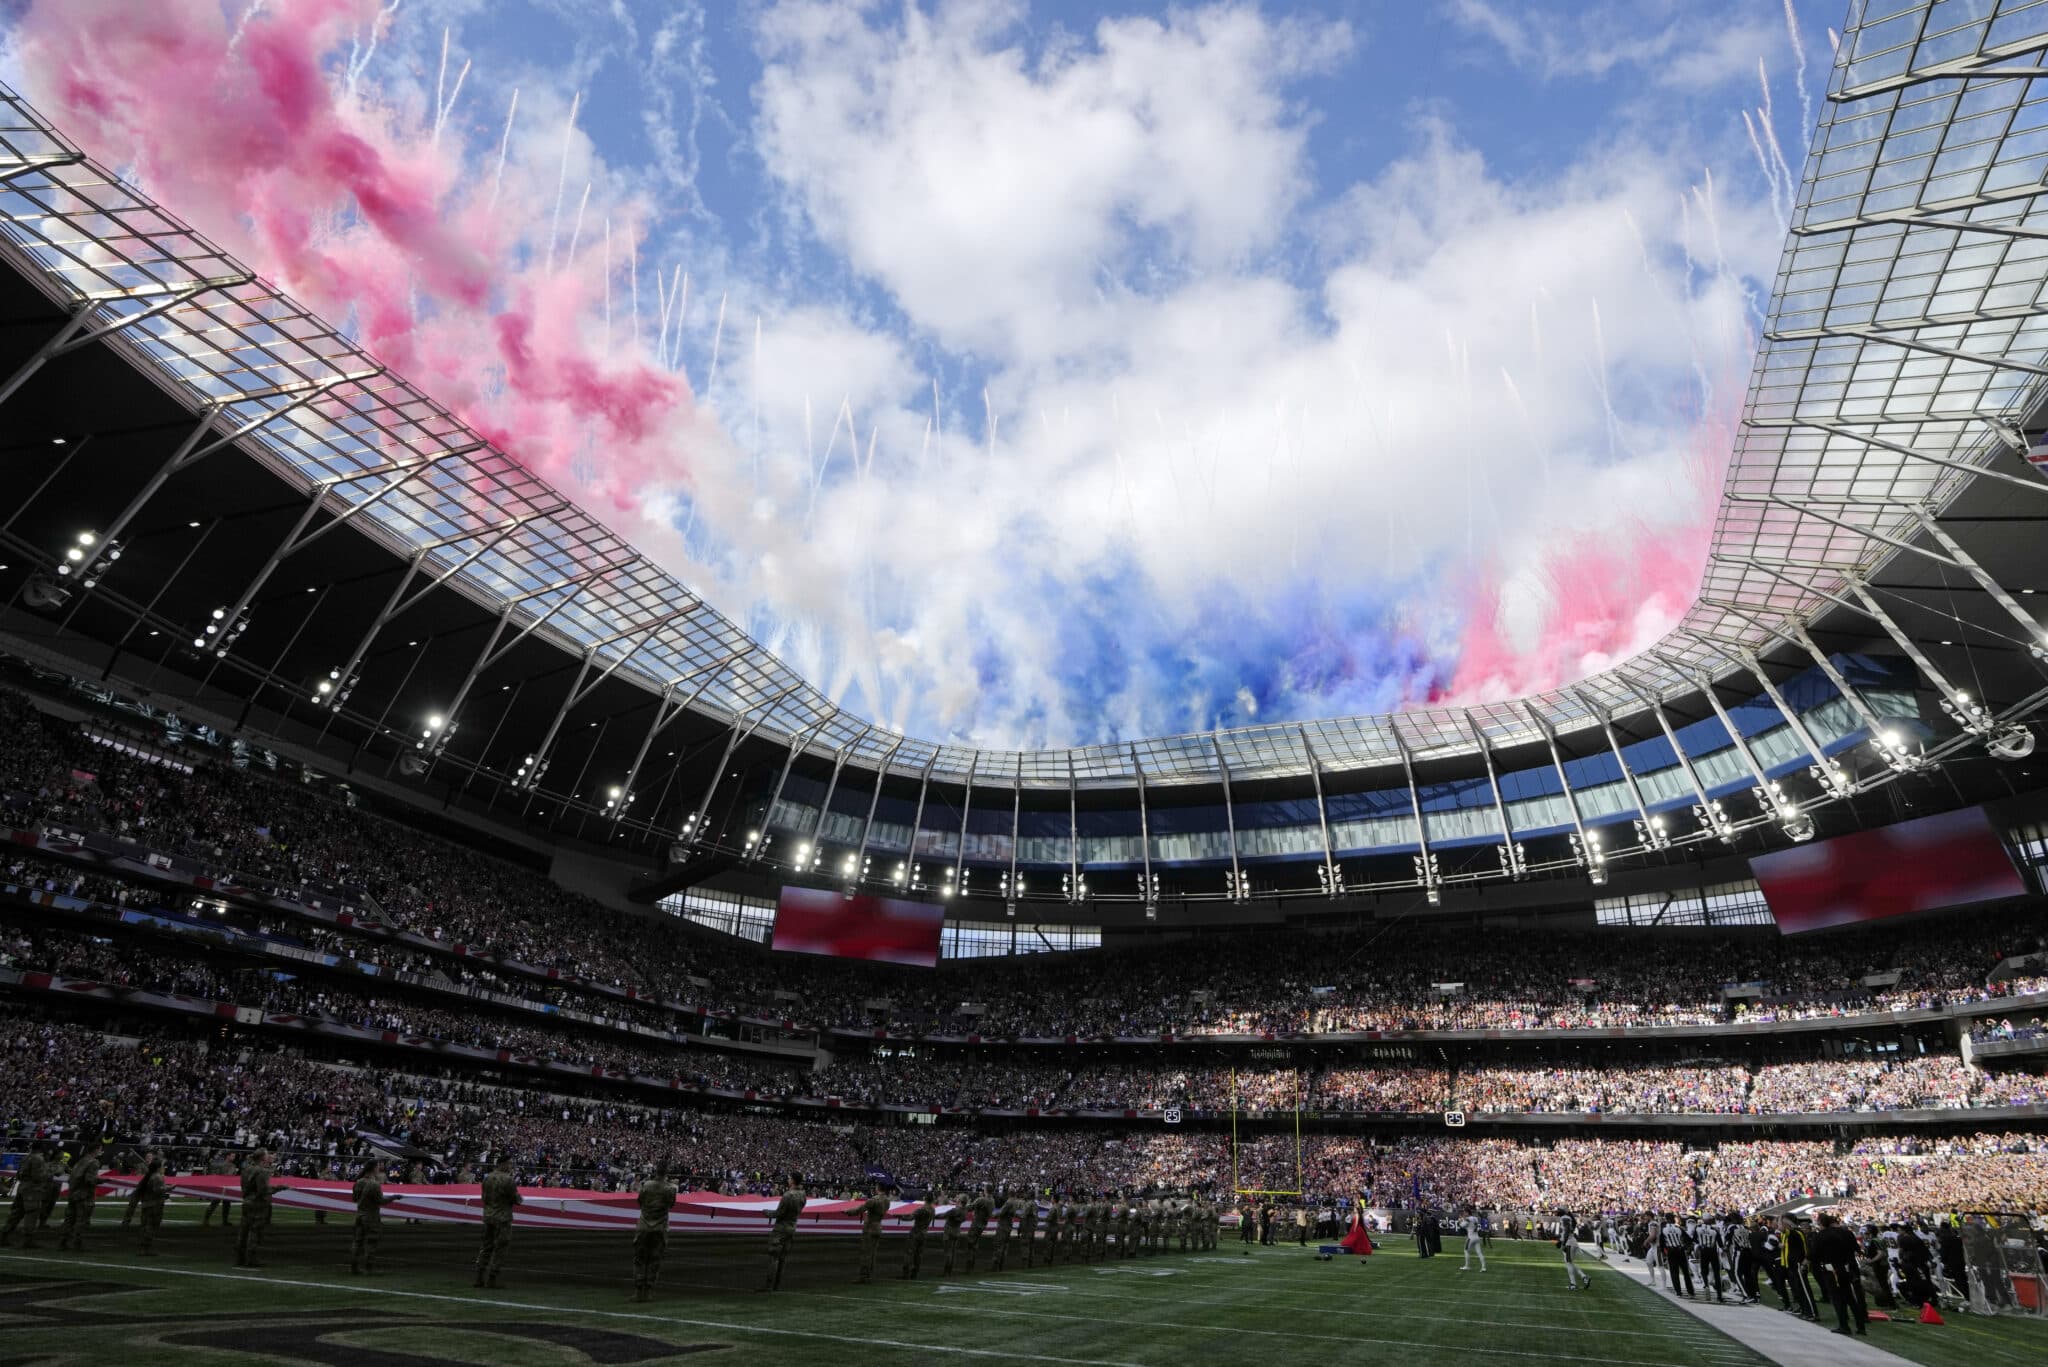 Phoebe Haines sings the US national anthem before an NFL match between Minnesota Vikings and New Orleans Saints at the Tottenham Hotspur stadium in London, Sunday, Oct. 2, 2022. (AP Photo/Kirsty Wigglesworth)